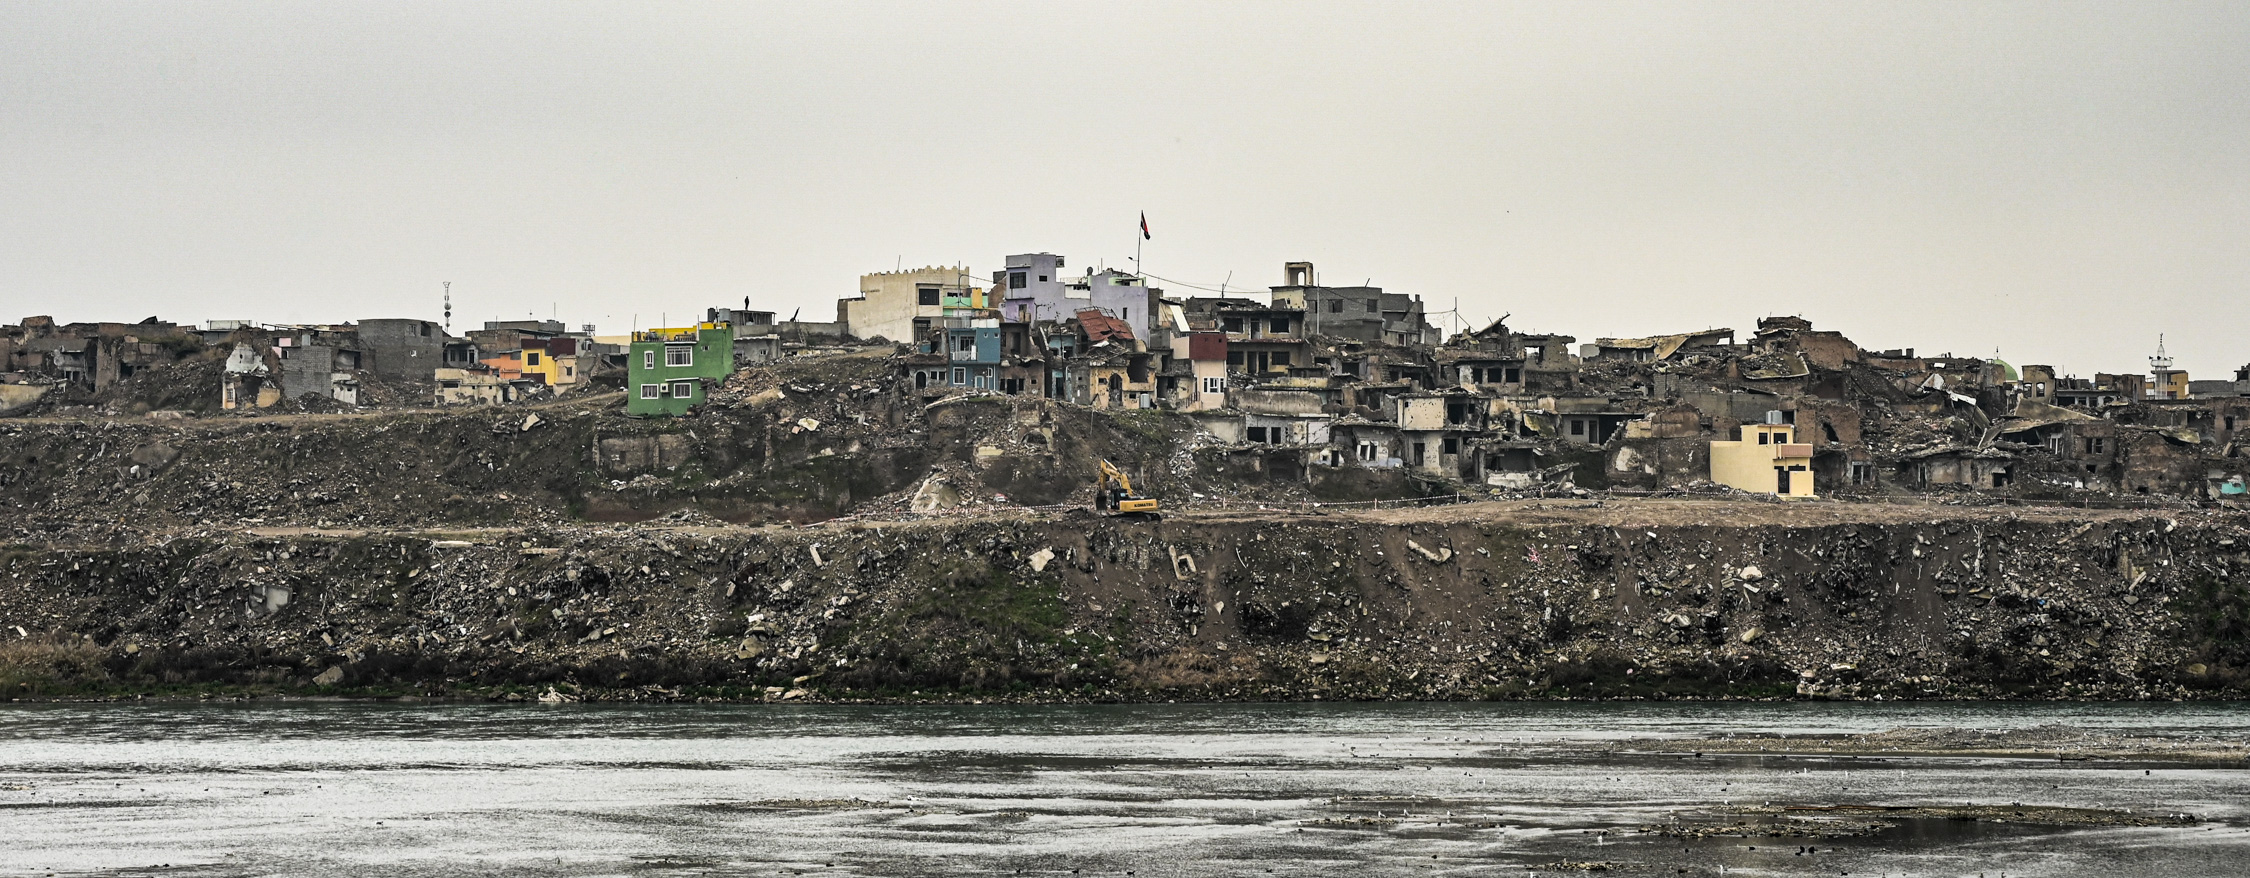 General view of the destroyed old city of Mosul from across the Tigris. A few families have returned to live amongst the rubble (MEE/Finbar Anderson)